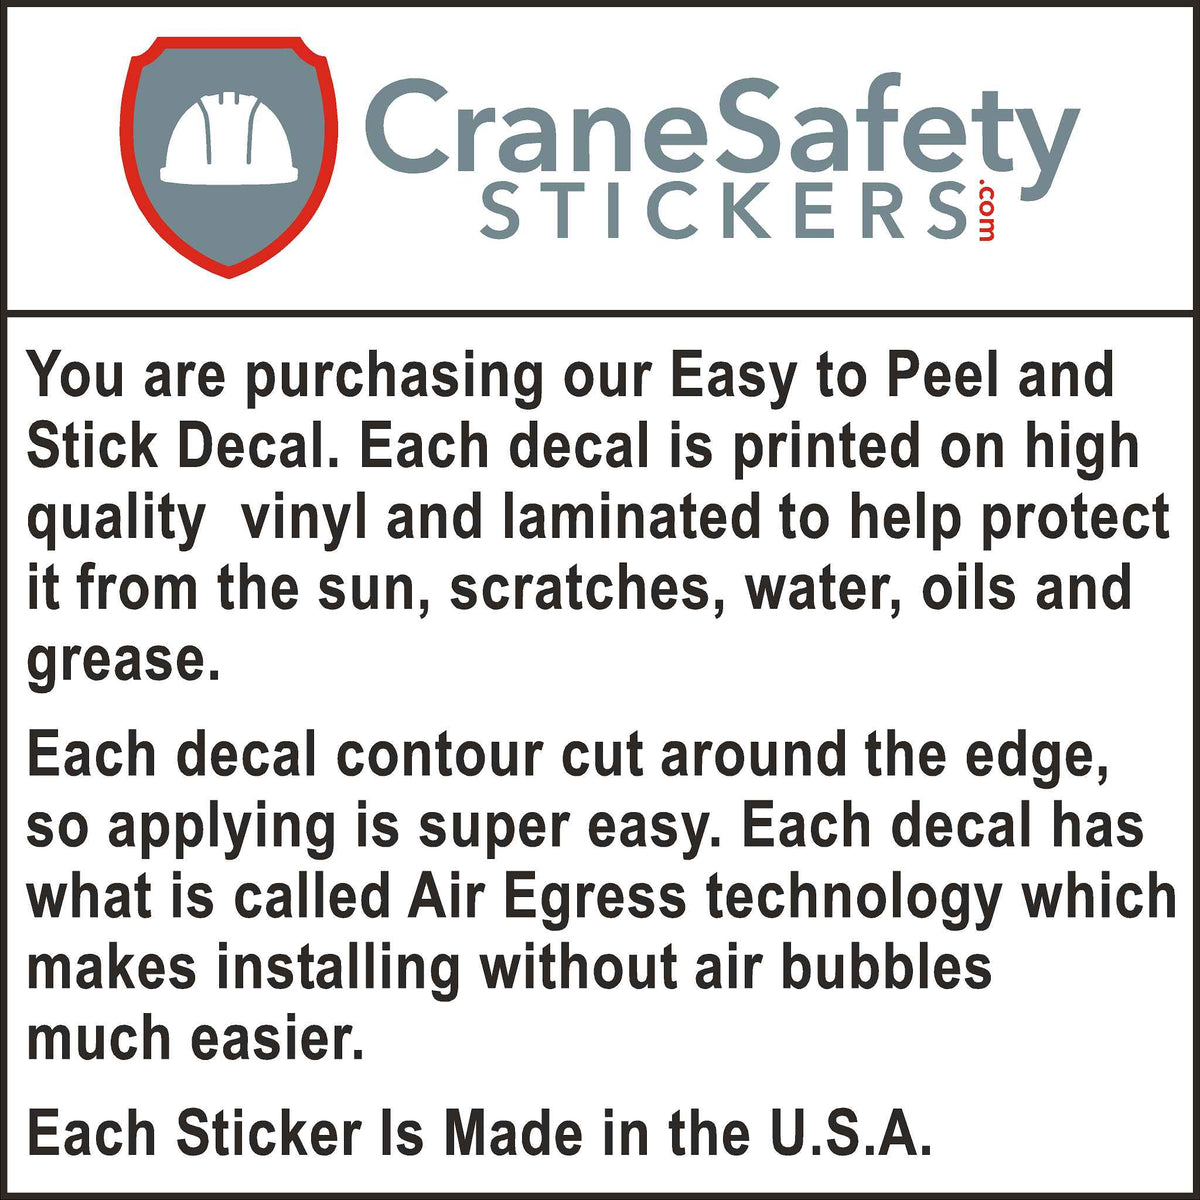 description on the the quality and how our osha 10 hour trained sticker is made.